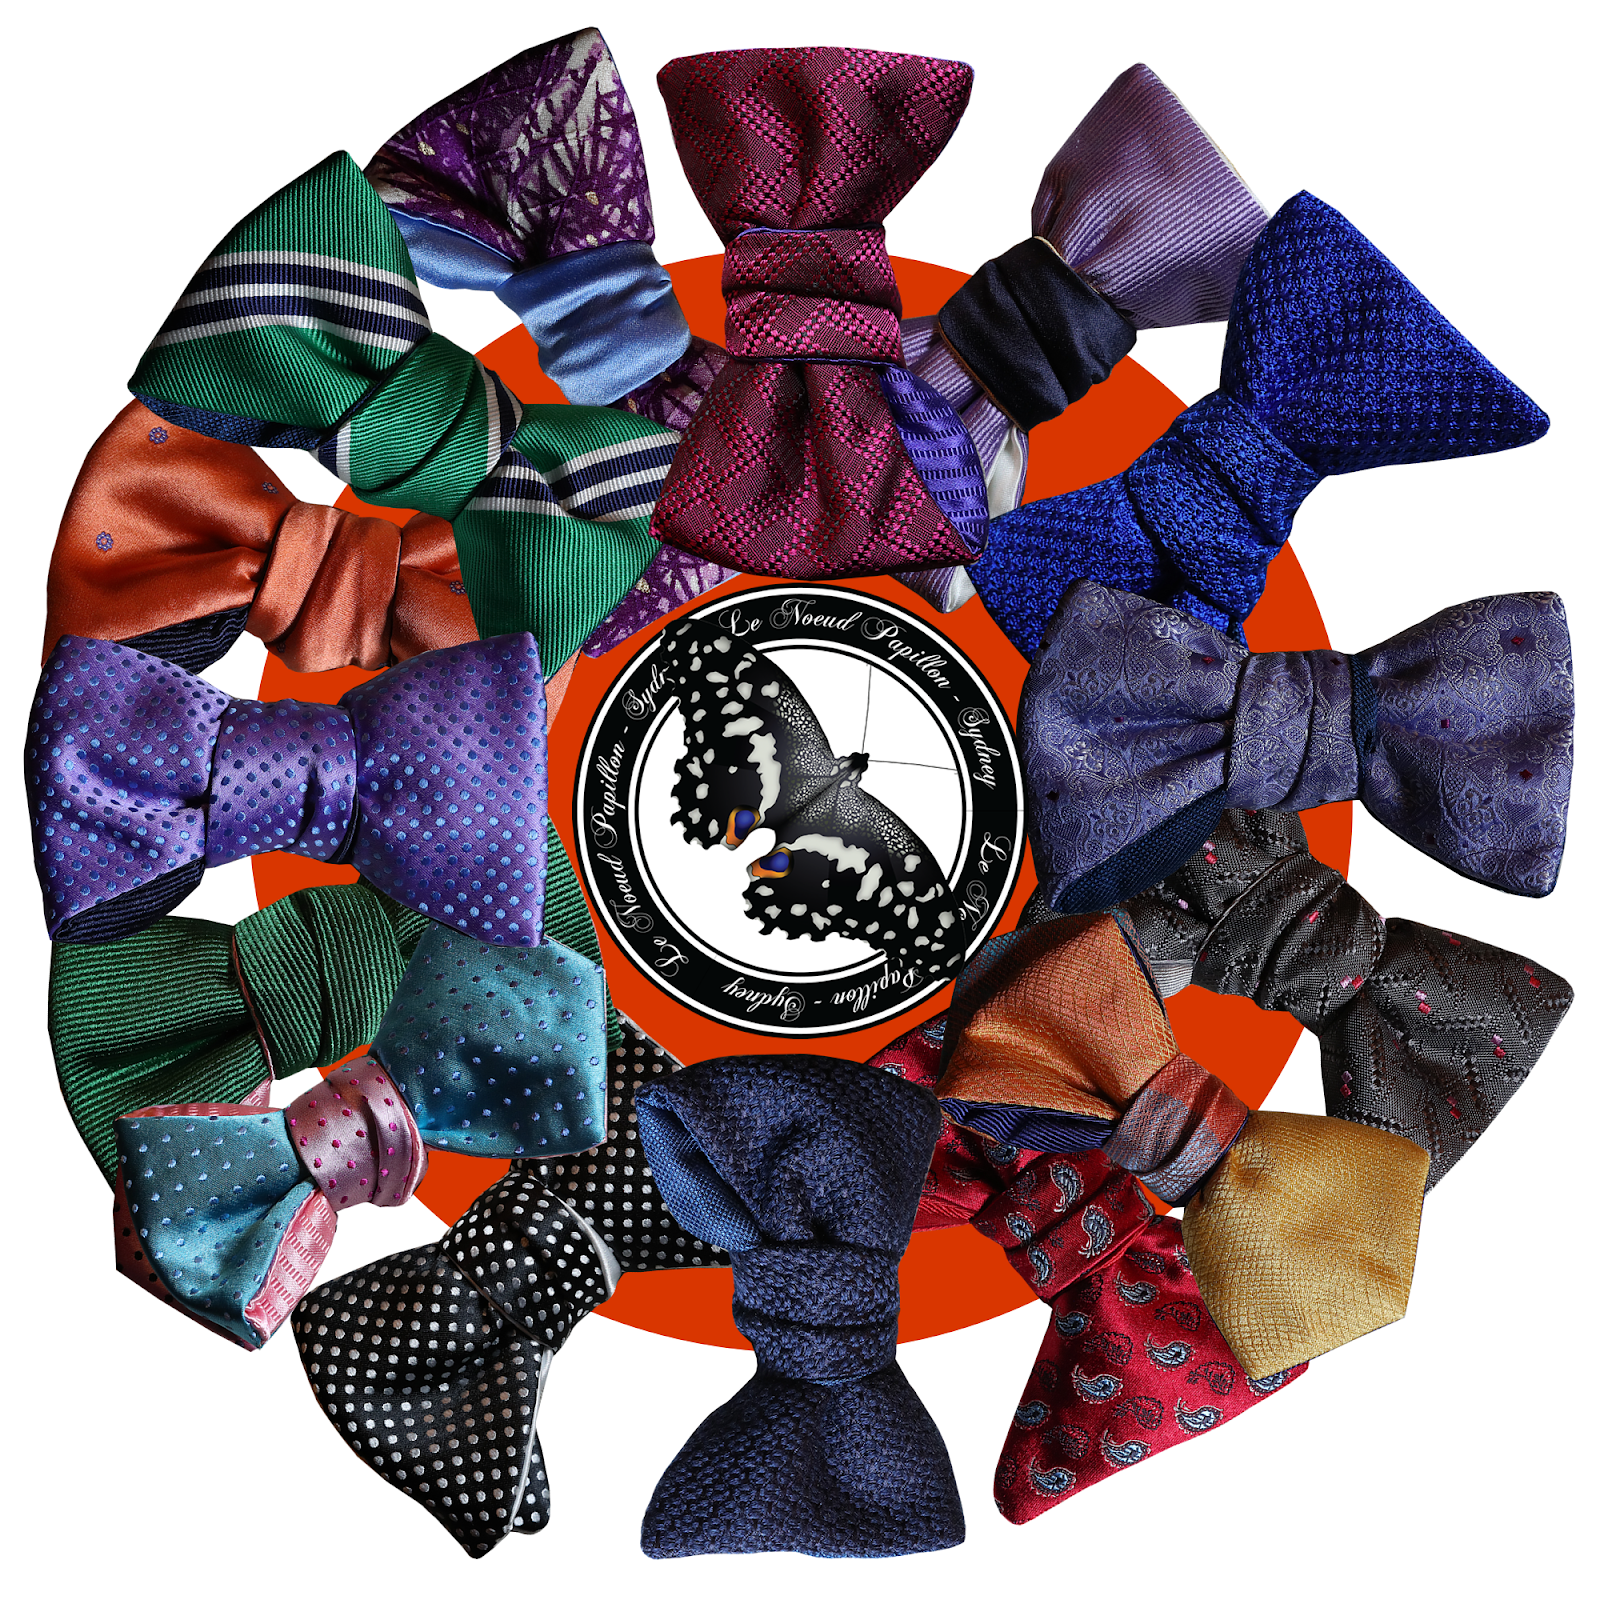 Le Noeud Papillon Of Sydney - For Lovers Of Bow Ties: A Fresh Batch of ...